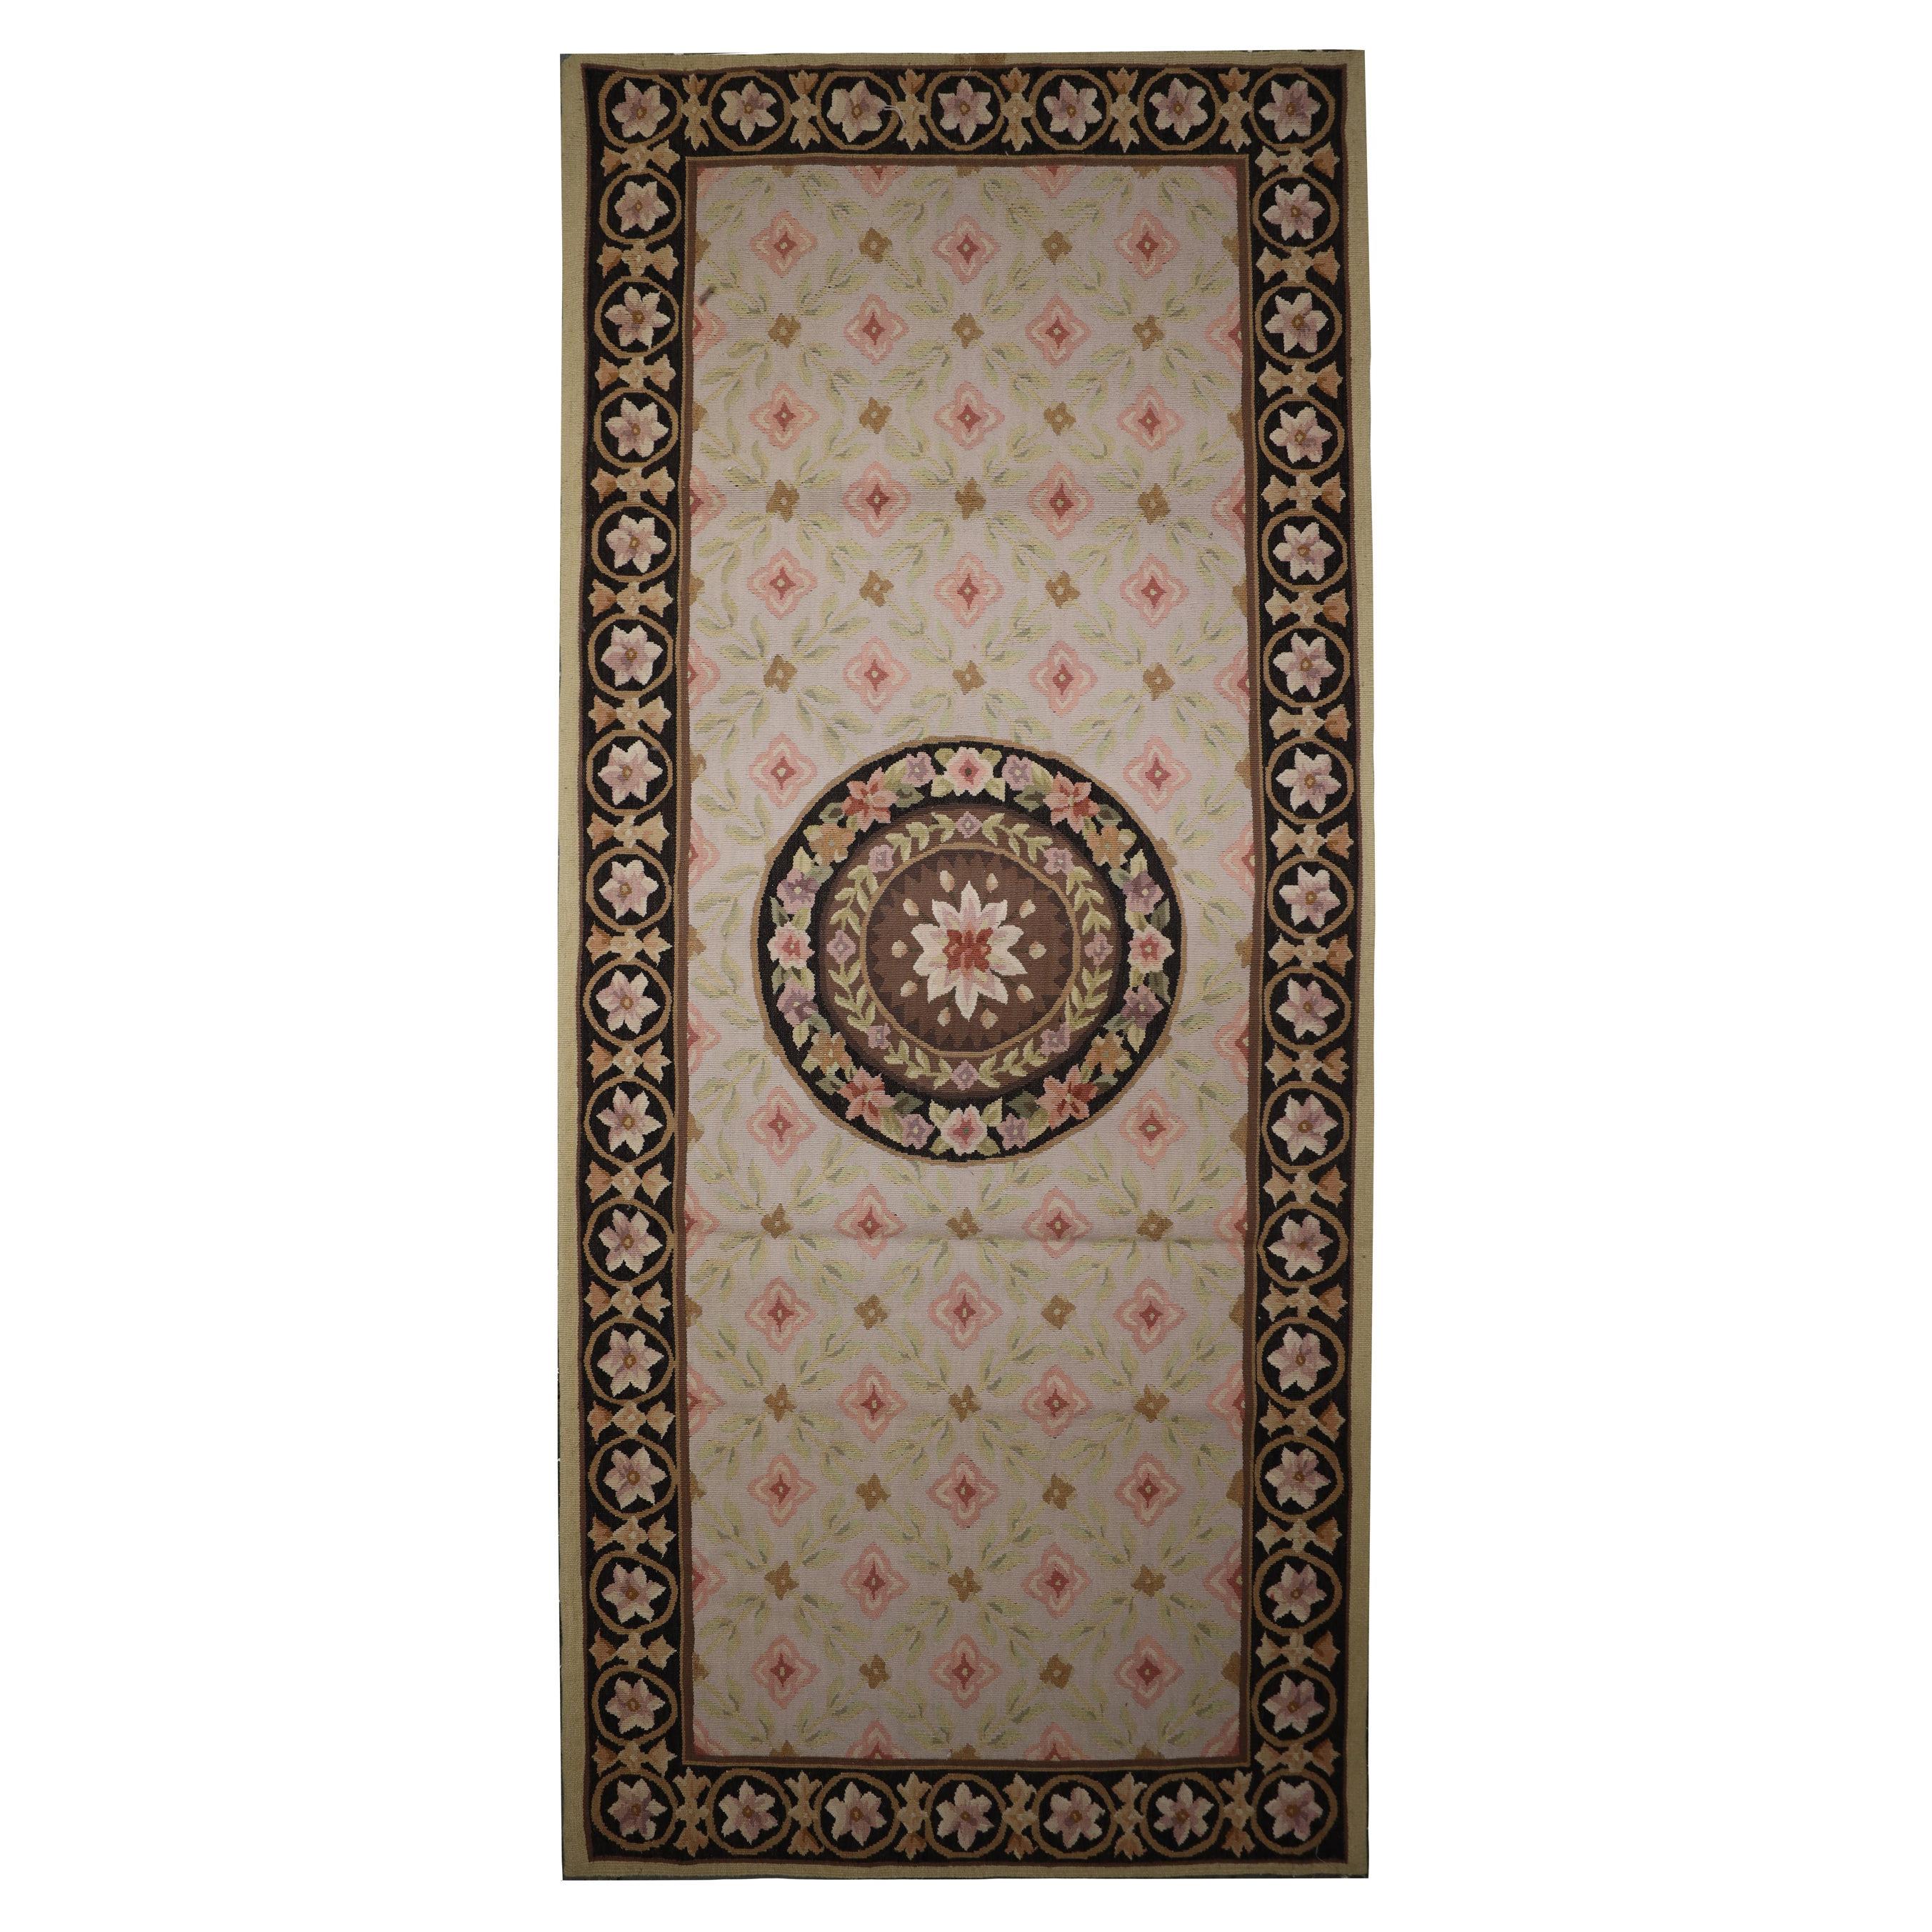 Small Wool Needlepoint Runner Rug Handwoven Traditional Floral Area Rug